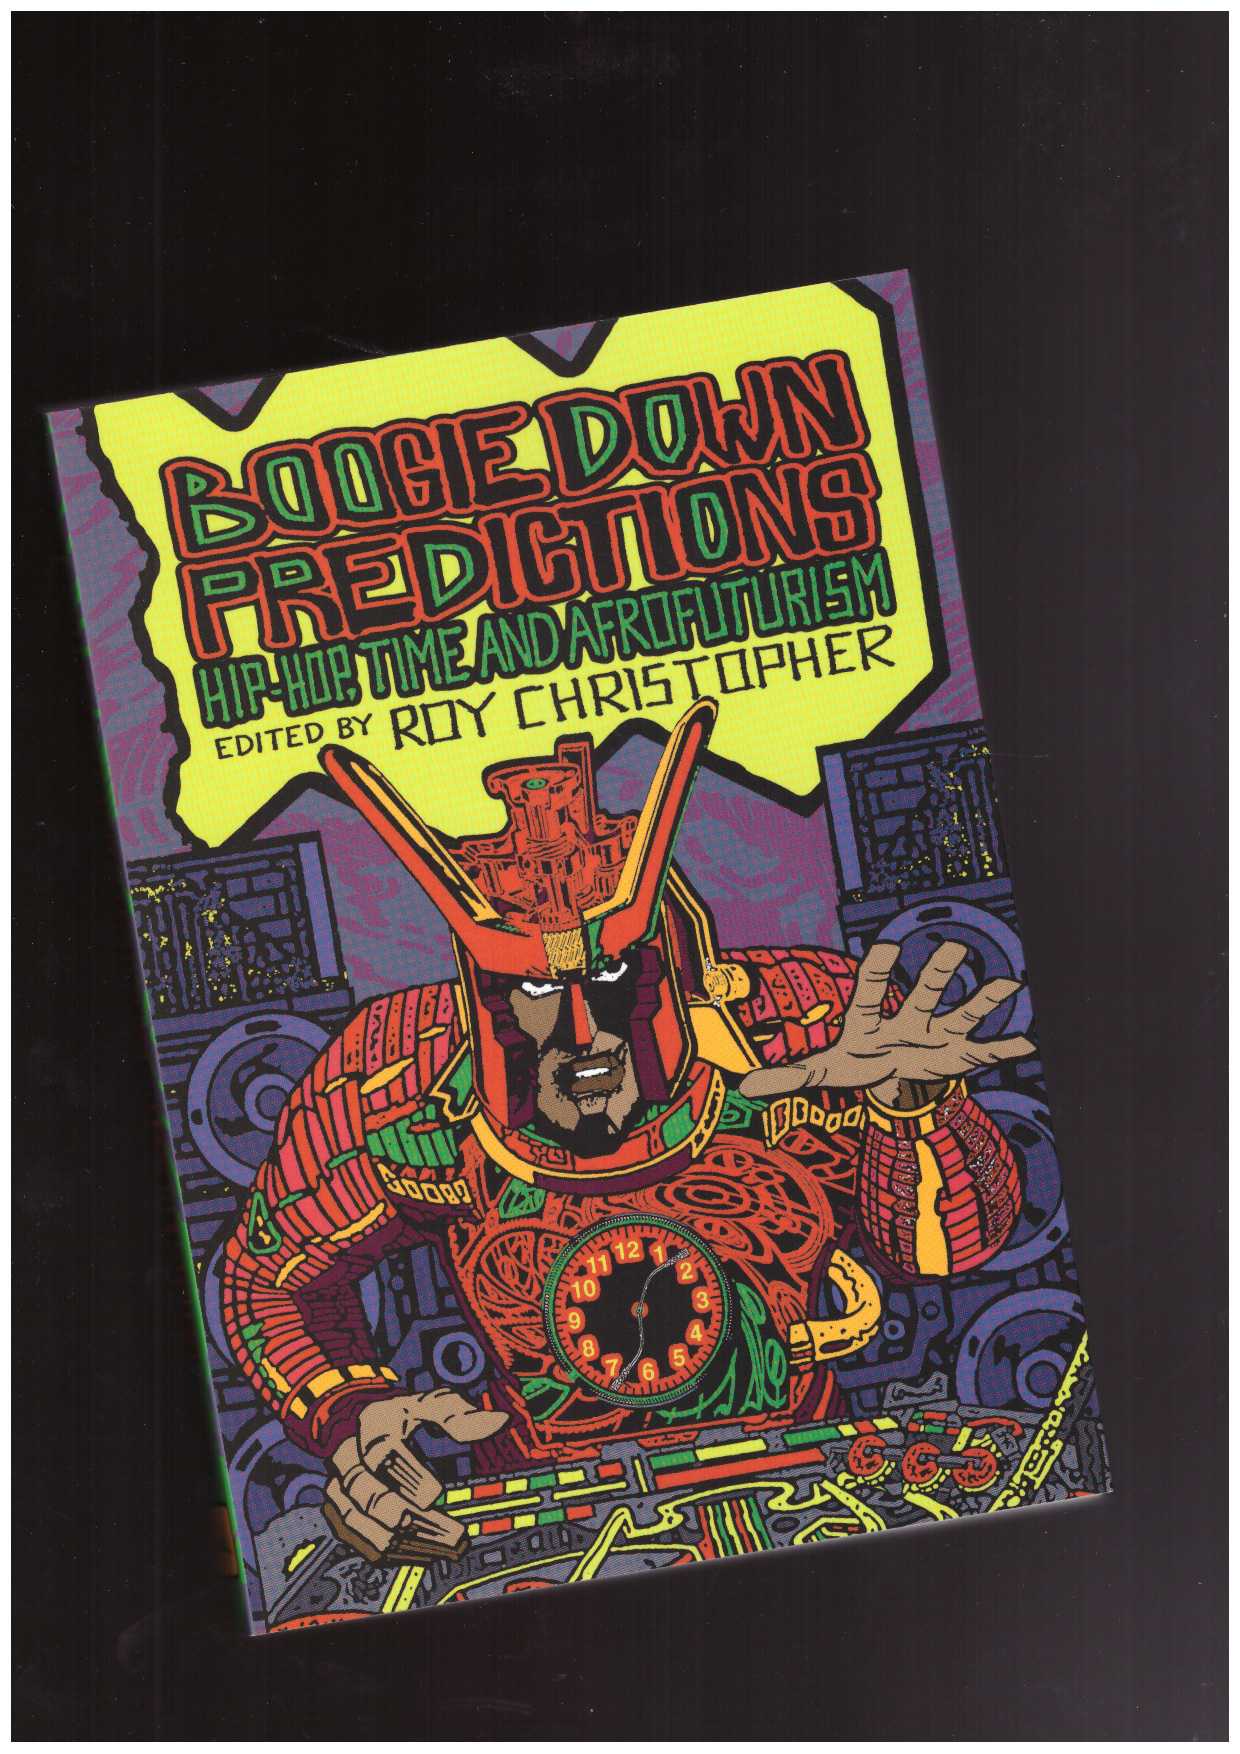 CHRISTOPHER, Roy - Boogie Down Predictions: Hip-Hop, Time, and Afrofuturism